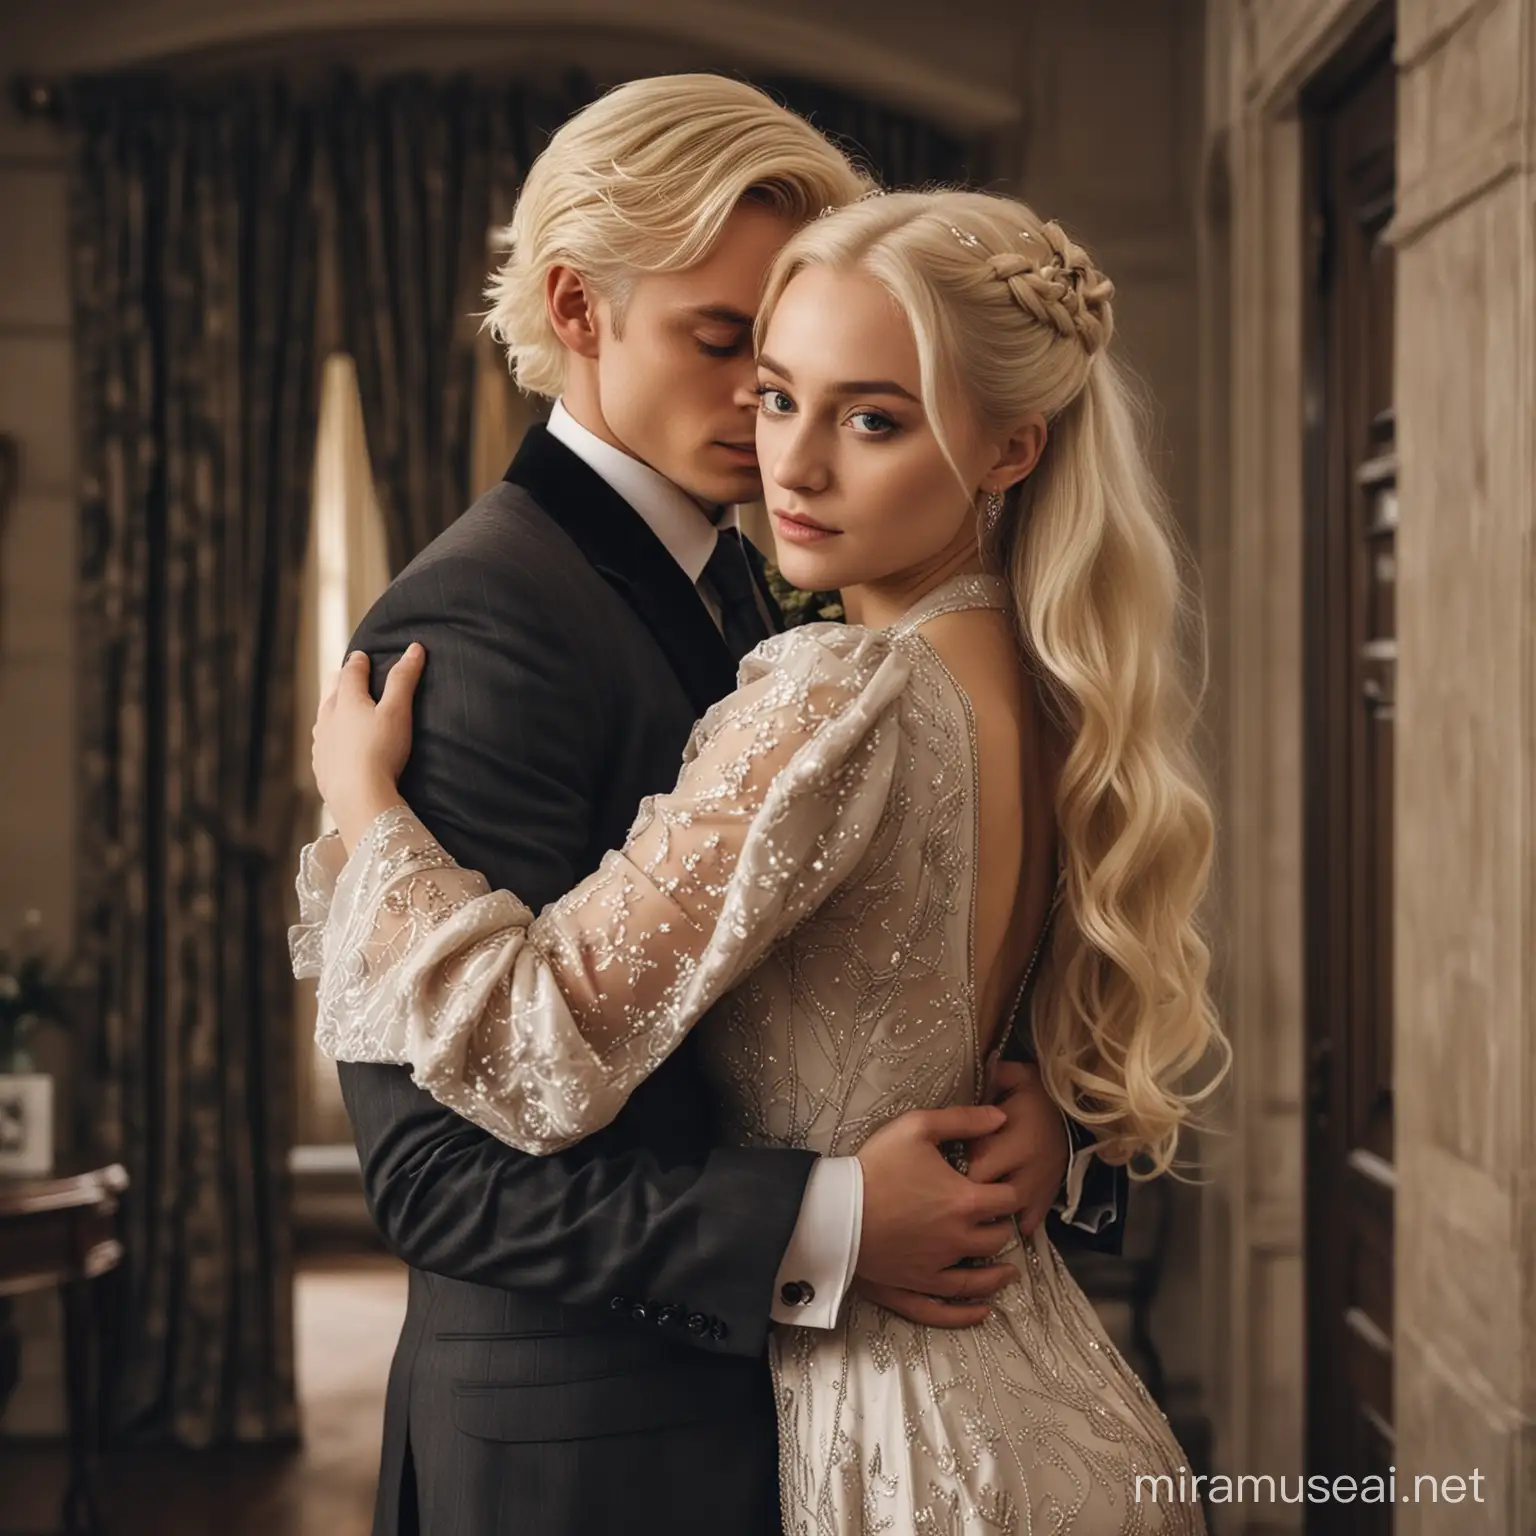 Elegant Blonde Woman Embracing DarkHaired Man in Luxurious Malfoy Manor Setting